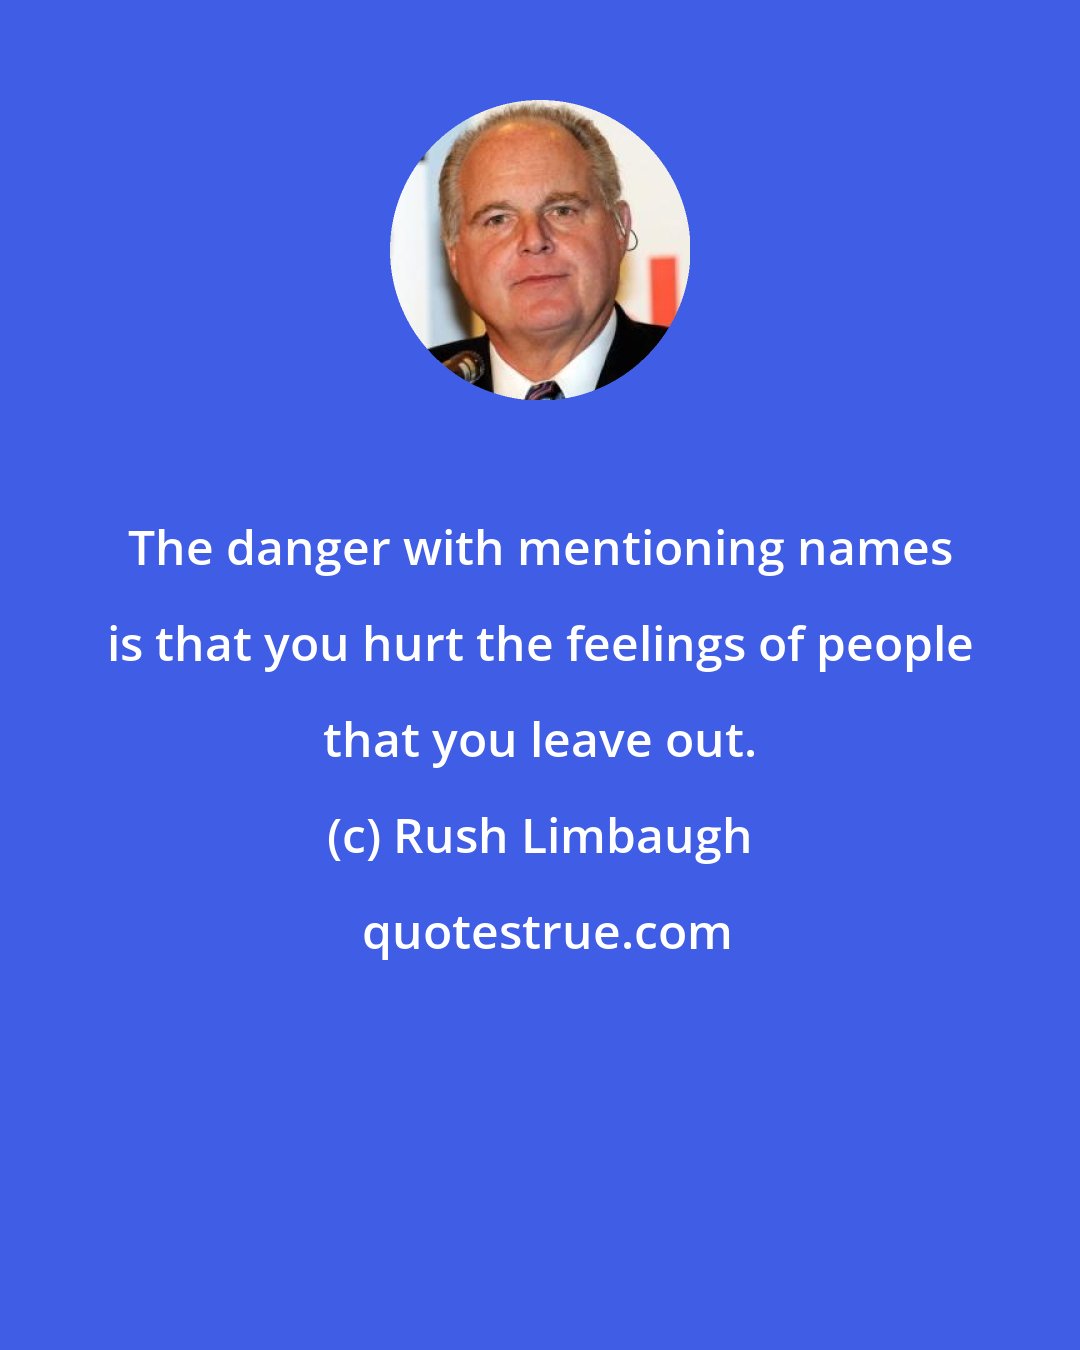 Rush Limbaugh: The danger with mentioning names is that you hurt the feelings of people that you leave out.